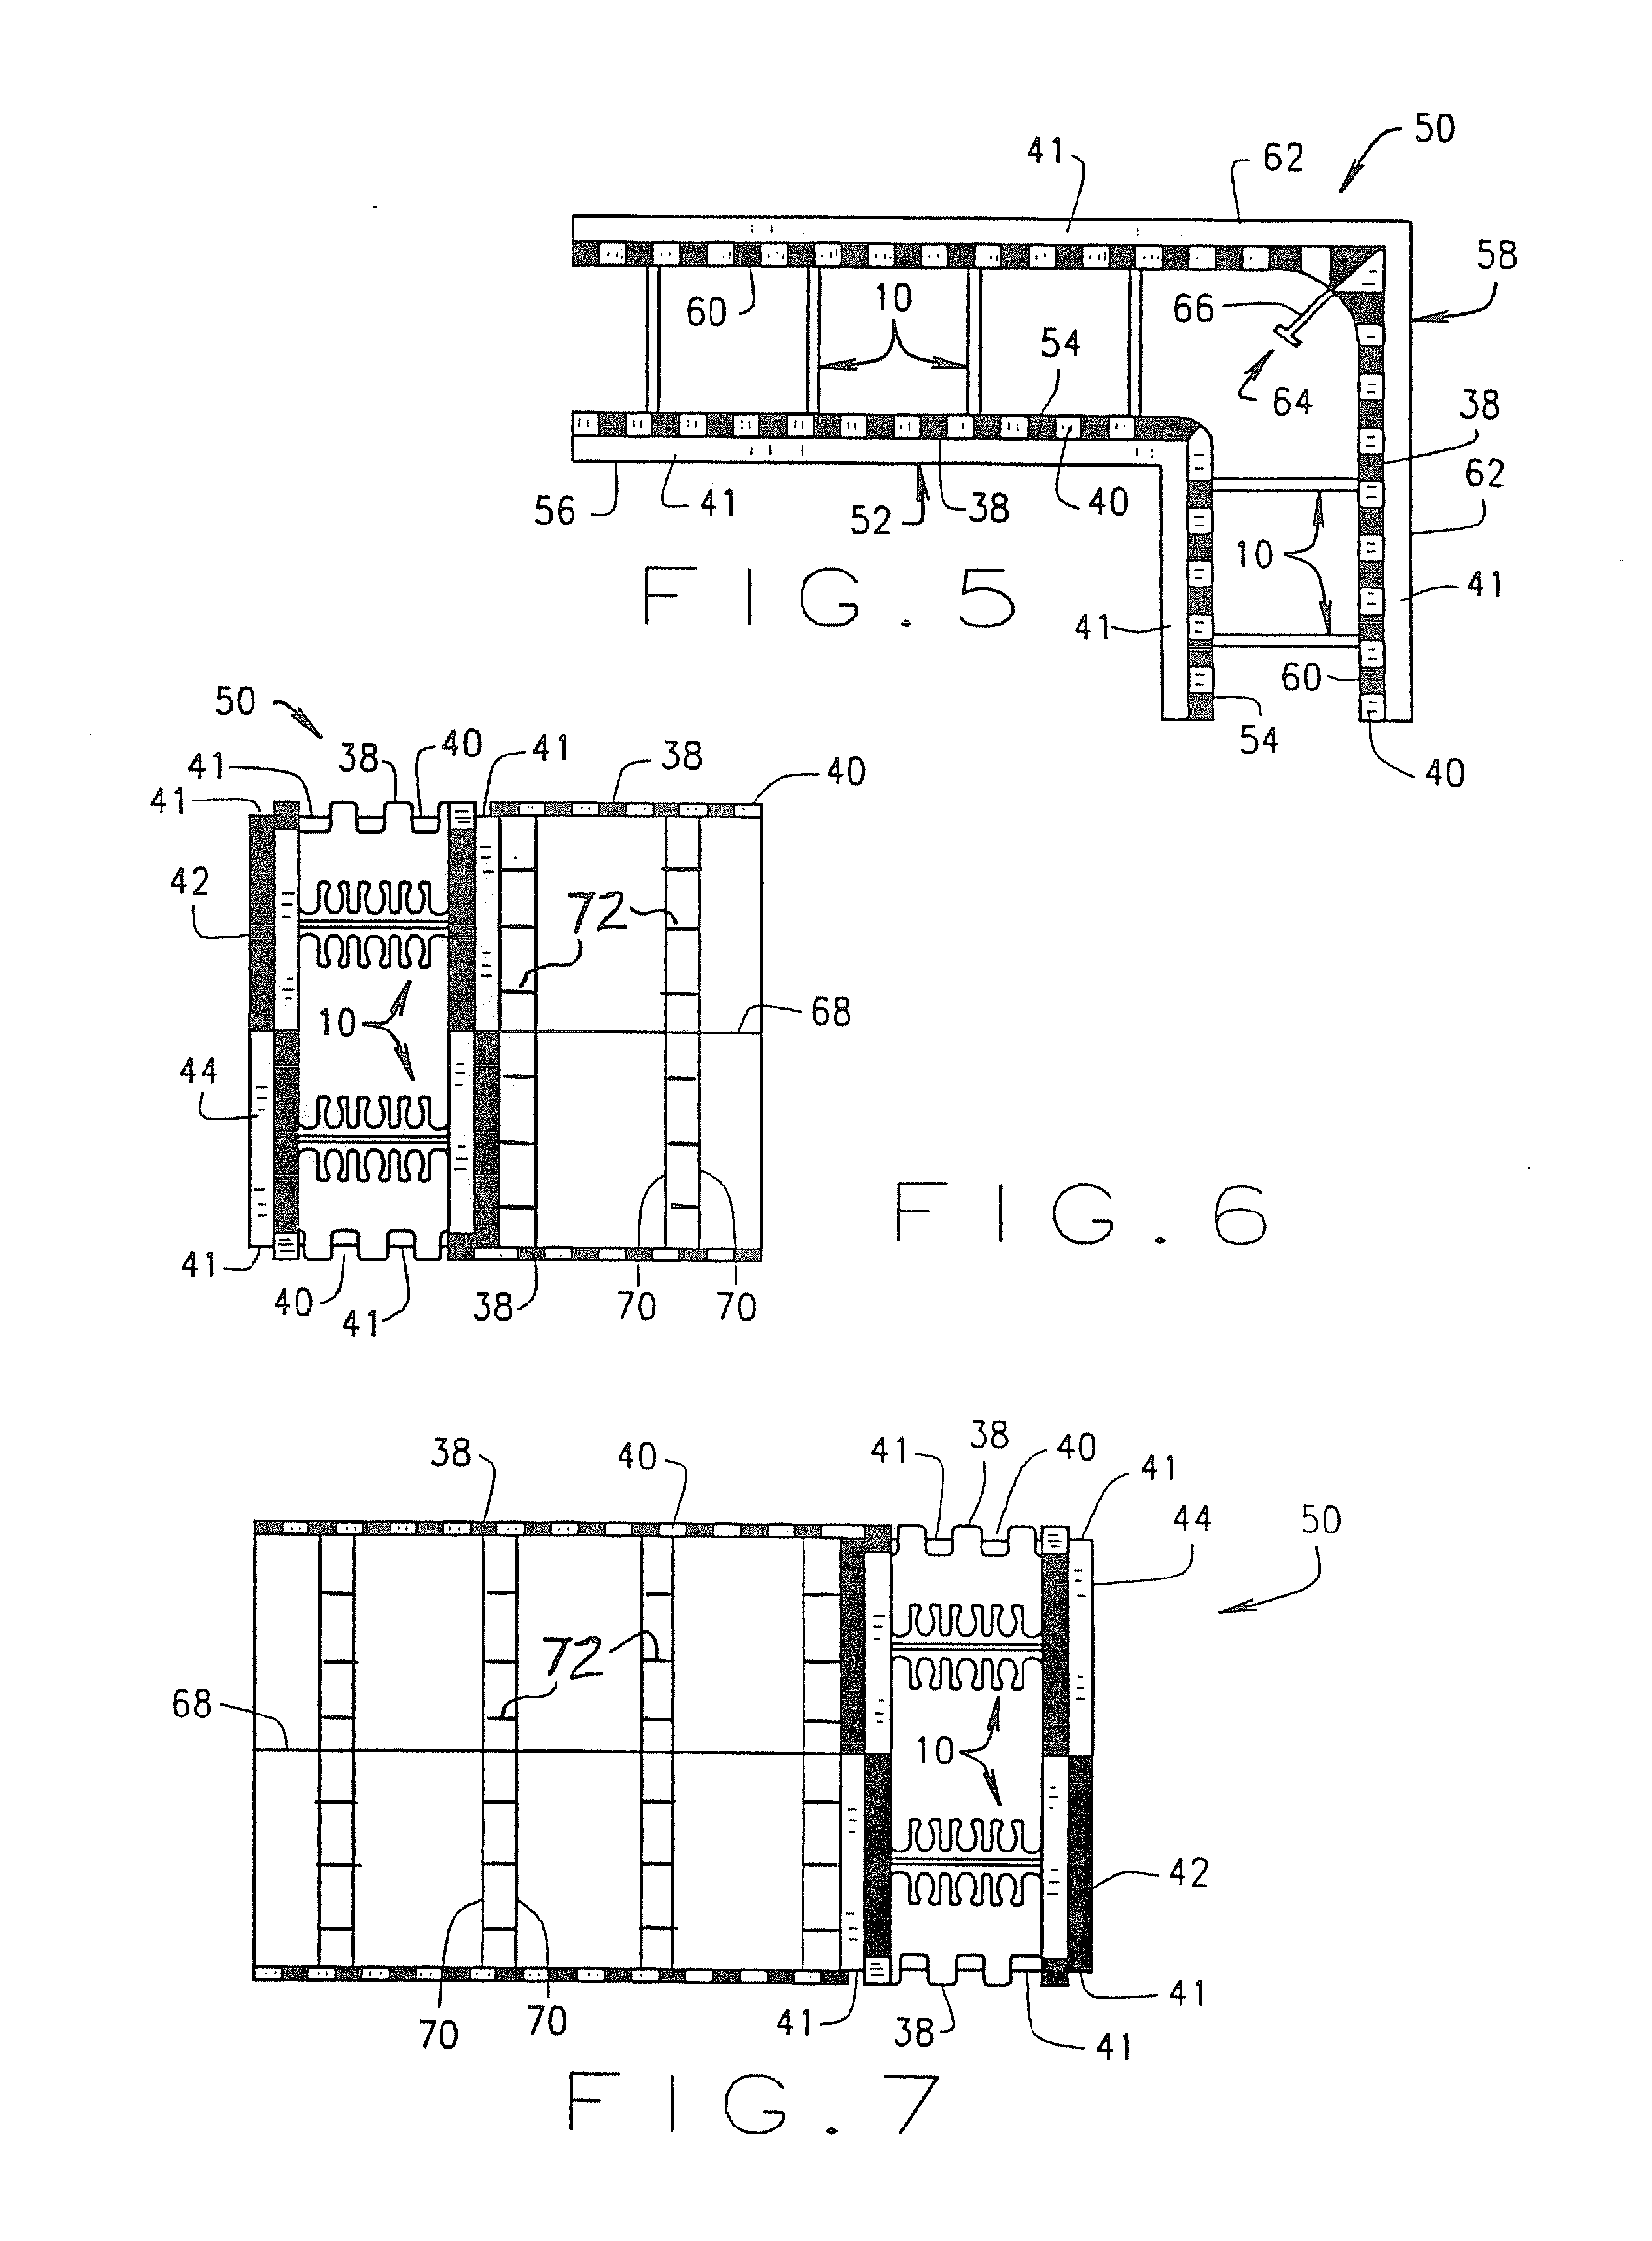 Prefabricated foam block concrete forms with open tooth connection means